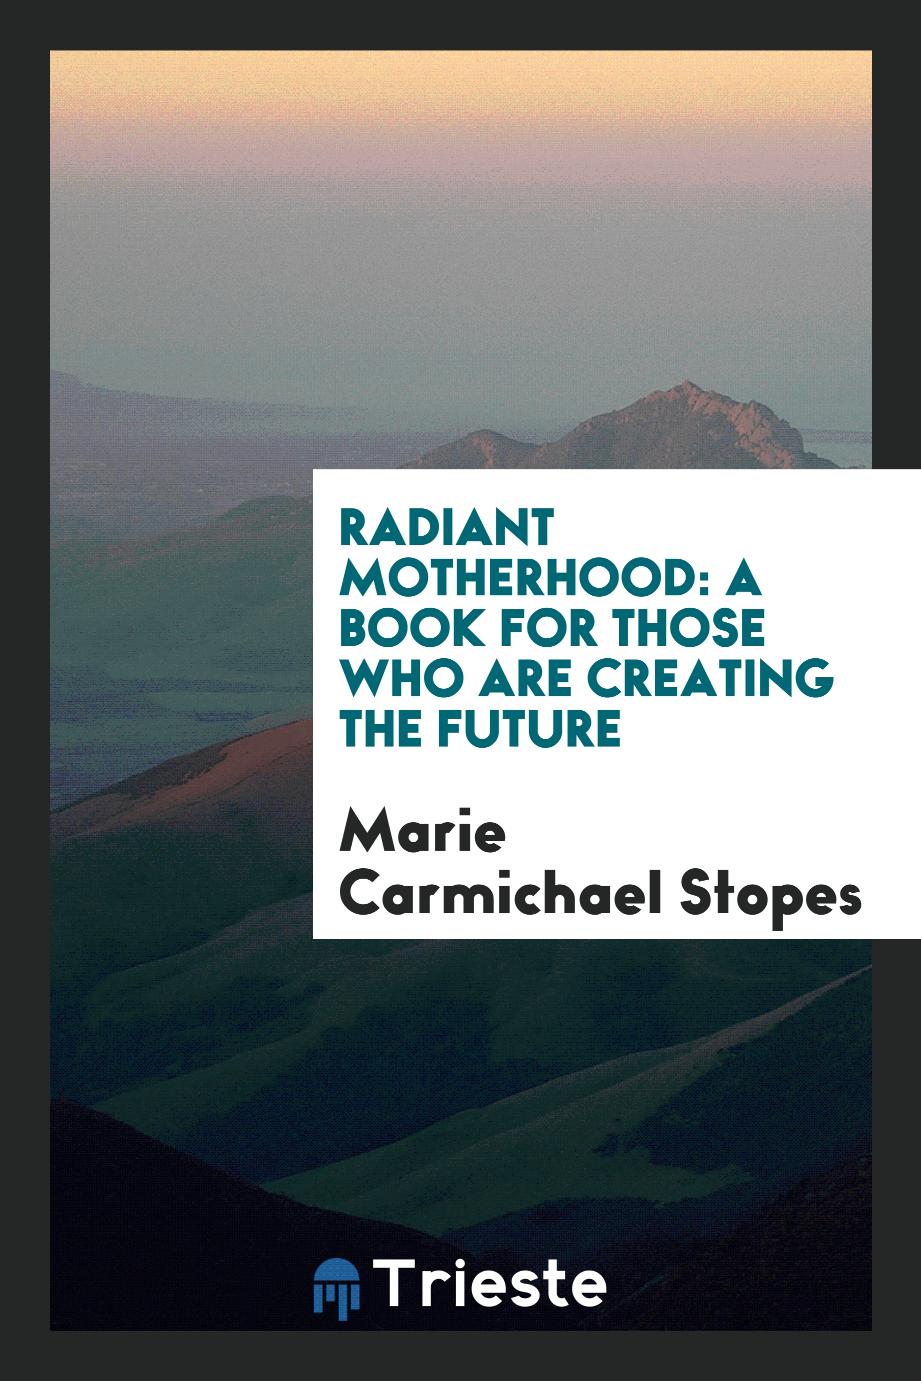 Radiant motherhood: a book for those who are creating the future